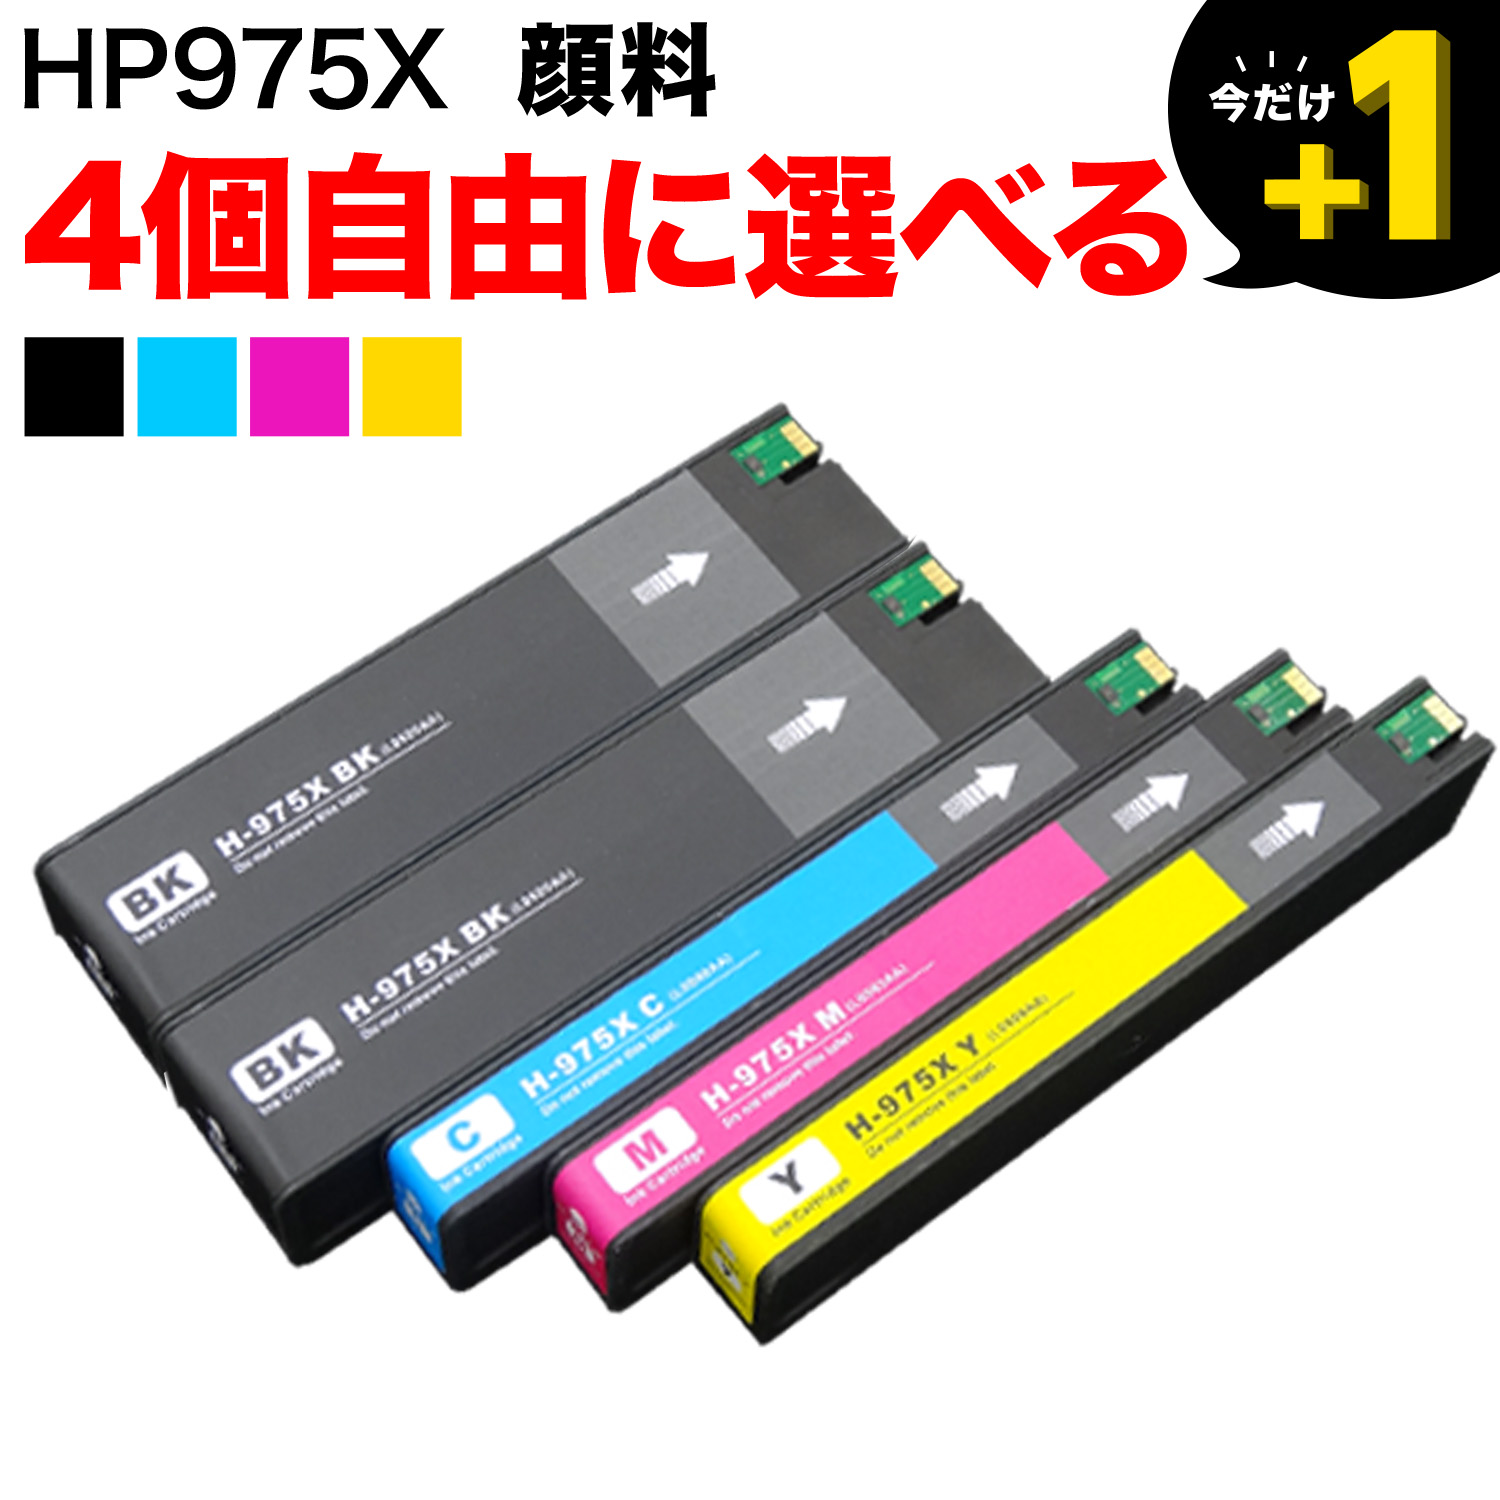 HP975X HP用 リサイクルインク 顔料 自由選択4個セット フリーチョイス 選べる4個 PageWide Pro 552dw PageWide Pro 577dw - 2